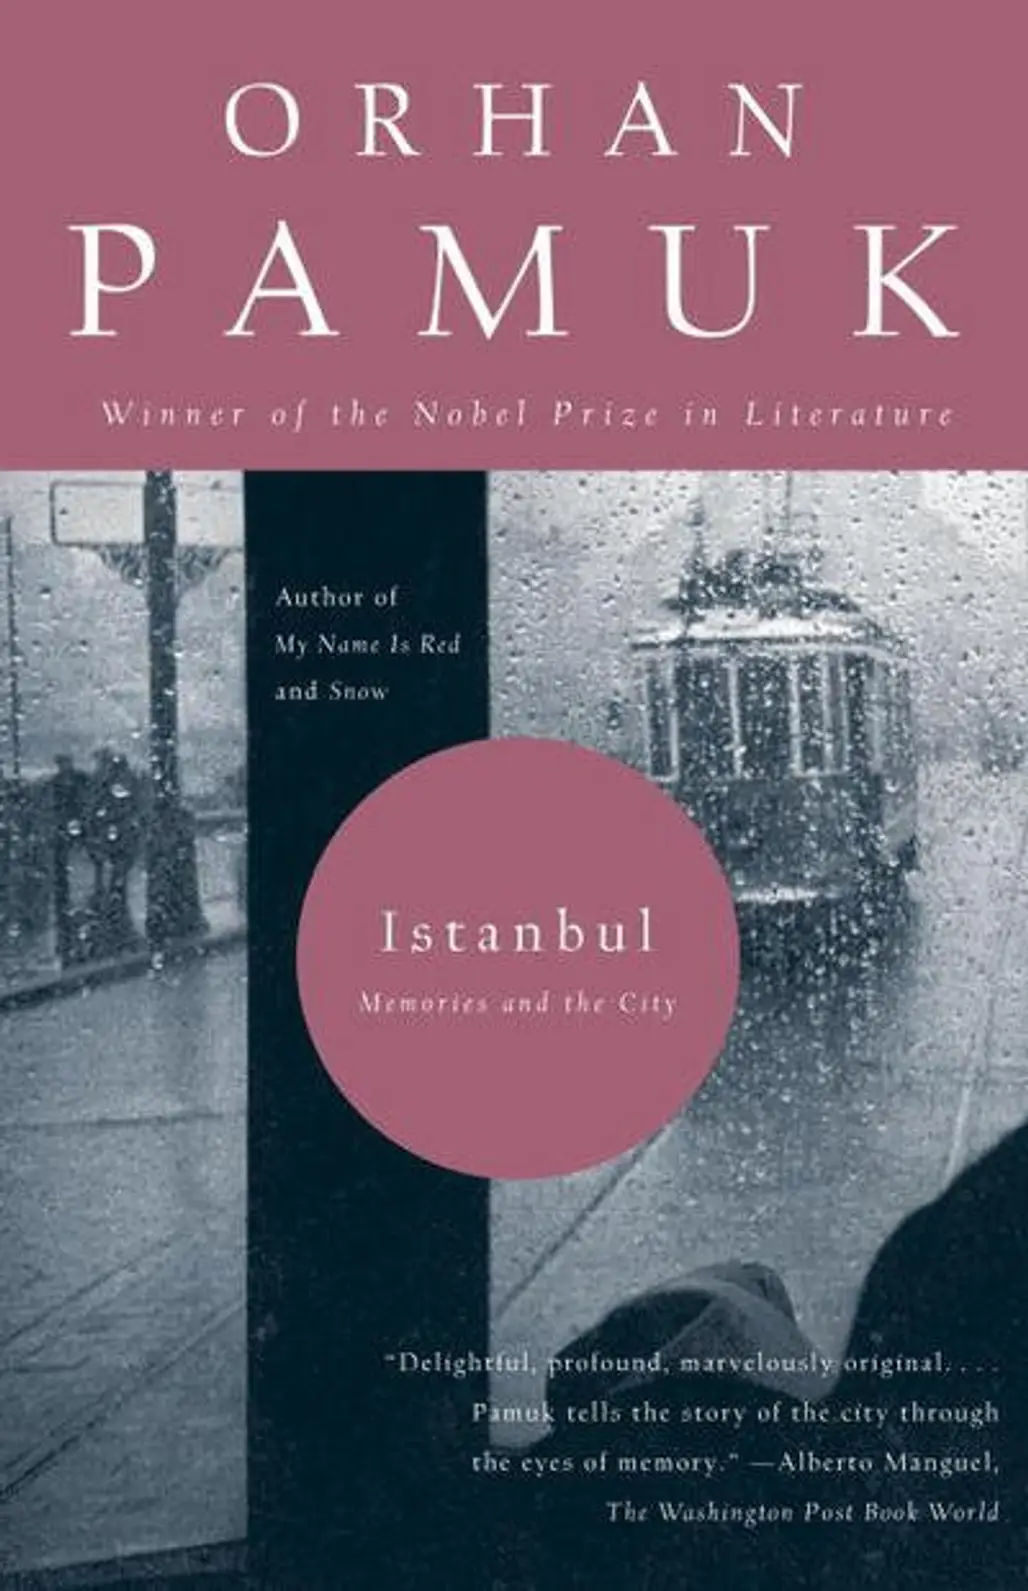 Istanbul: Memoires and the City by Orhan Pamuk